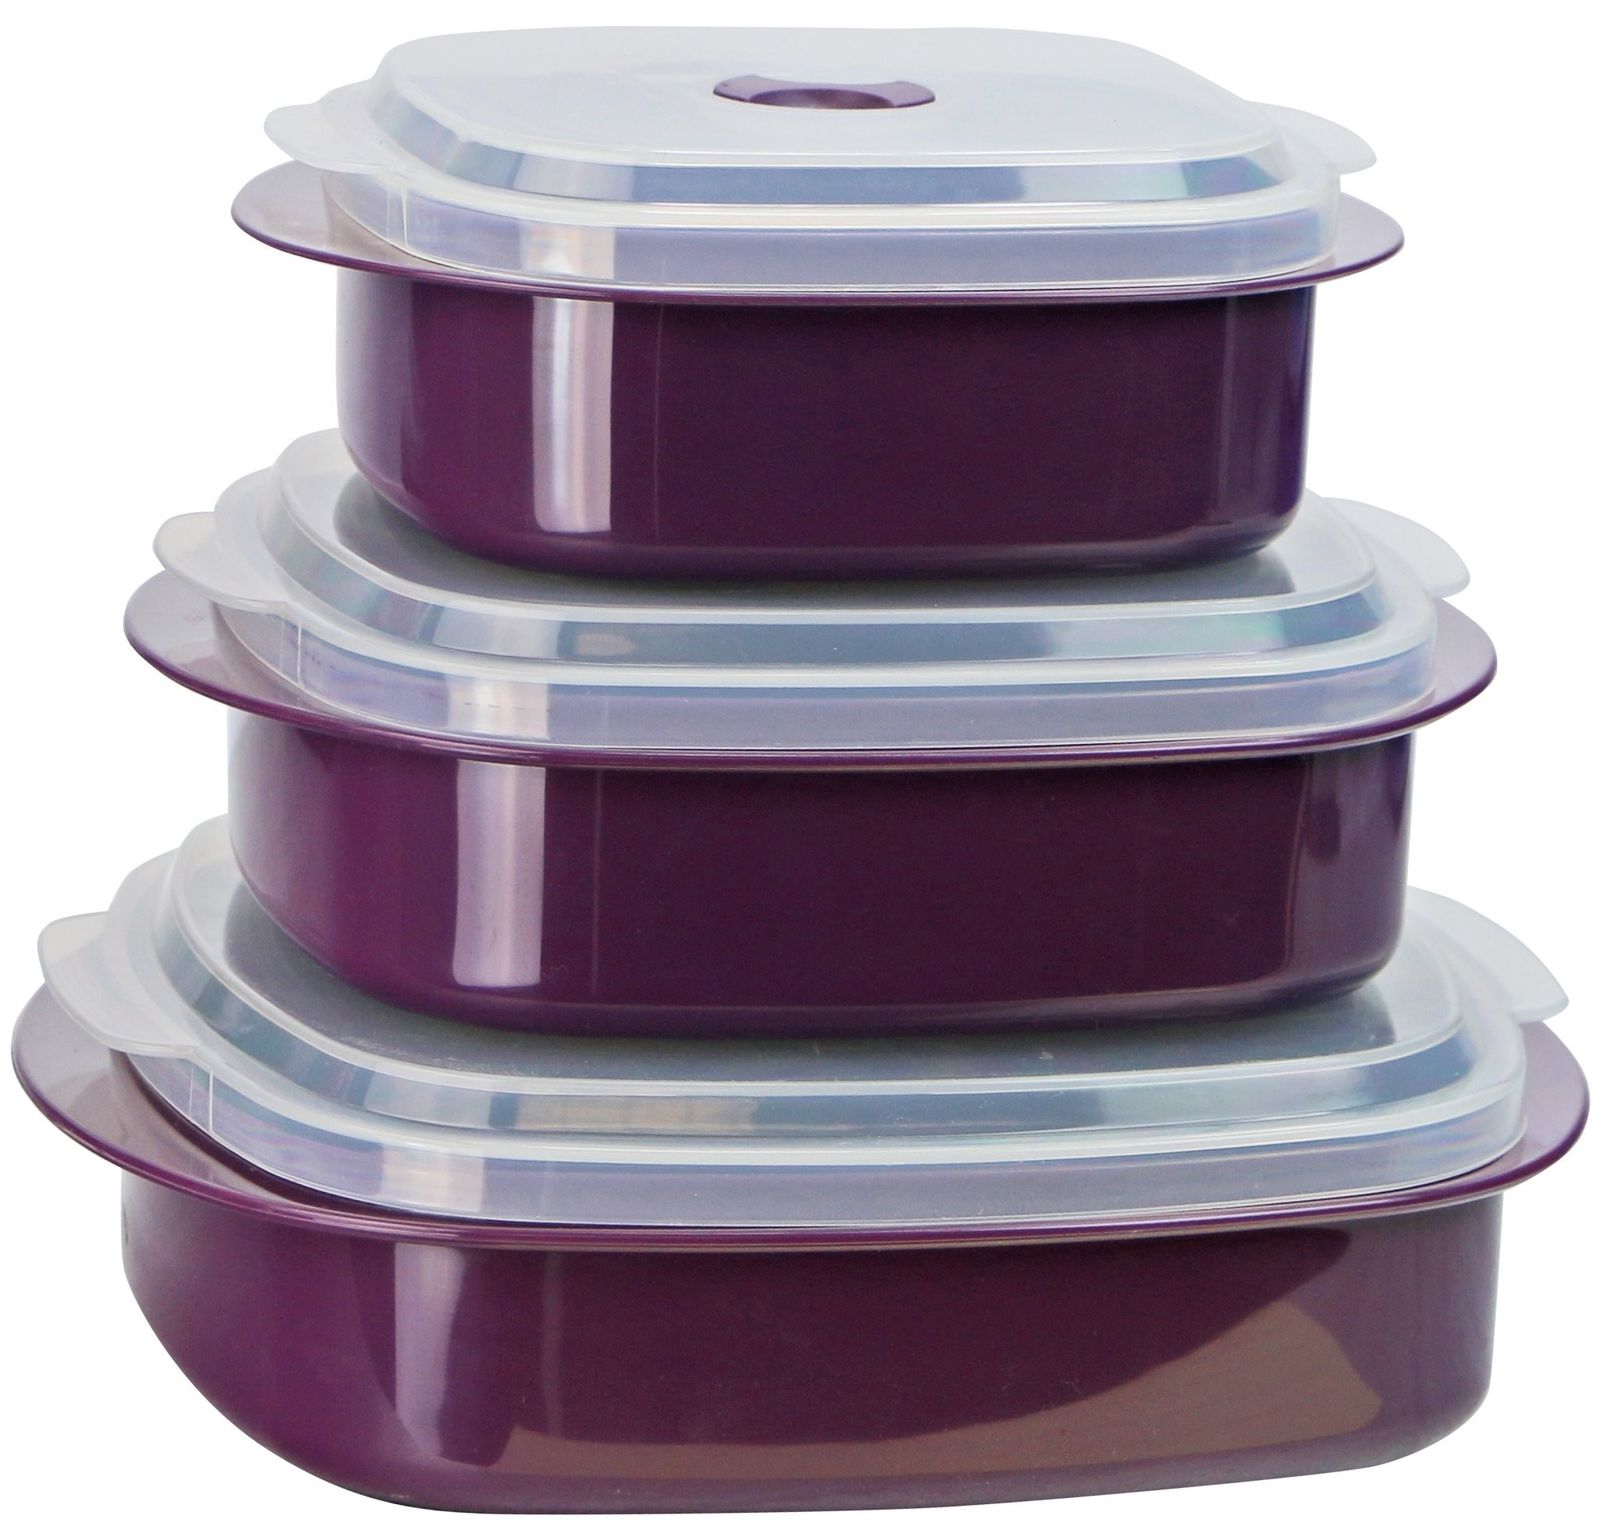 Picture of Reston Lloyd 20502 Microwave Cookware Set  Plum 